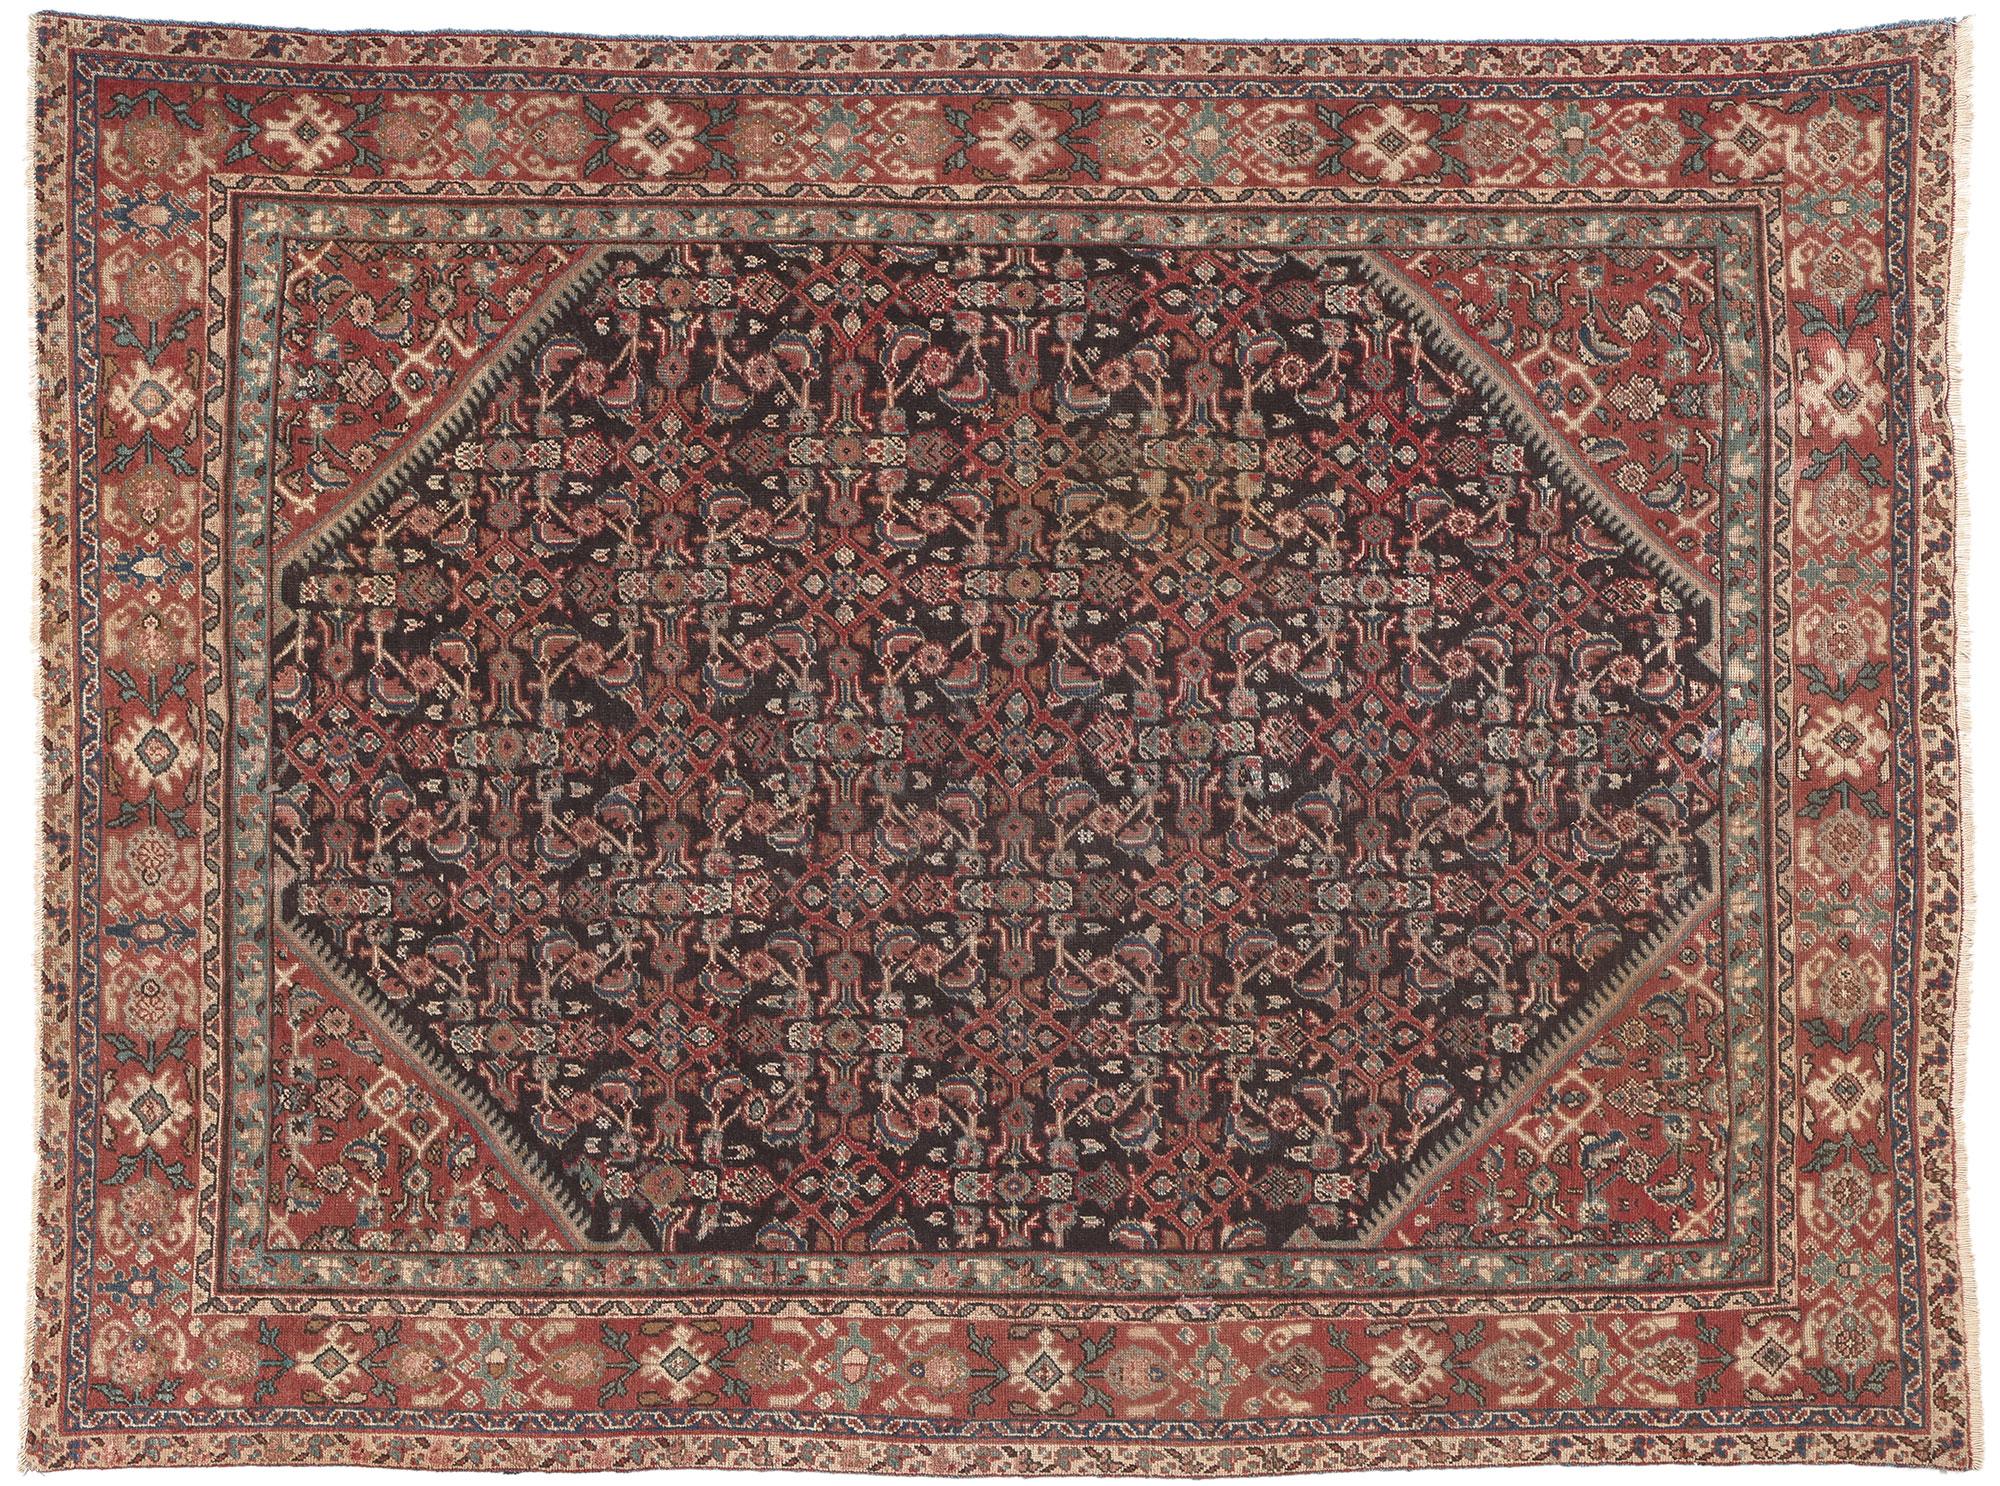 Antique-Worn Persian Mahal Rug, Traditional Sensibility Meets Rustic Charm For Sale 1